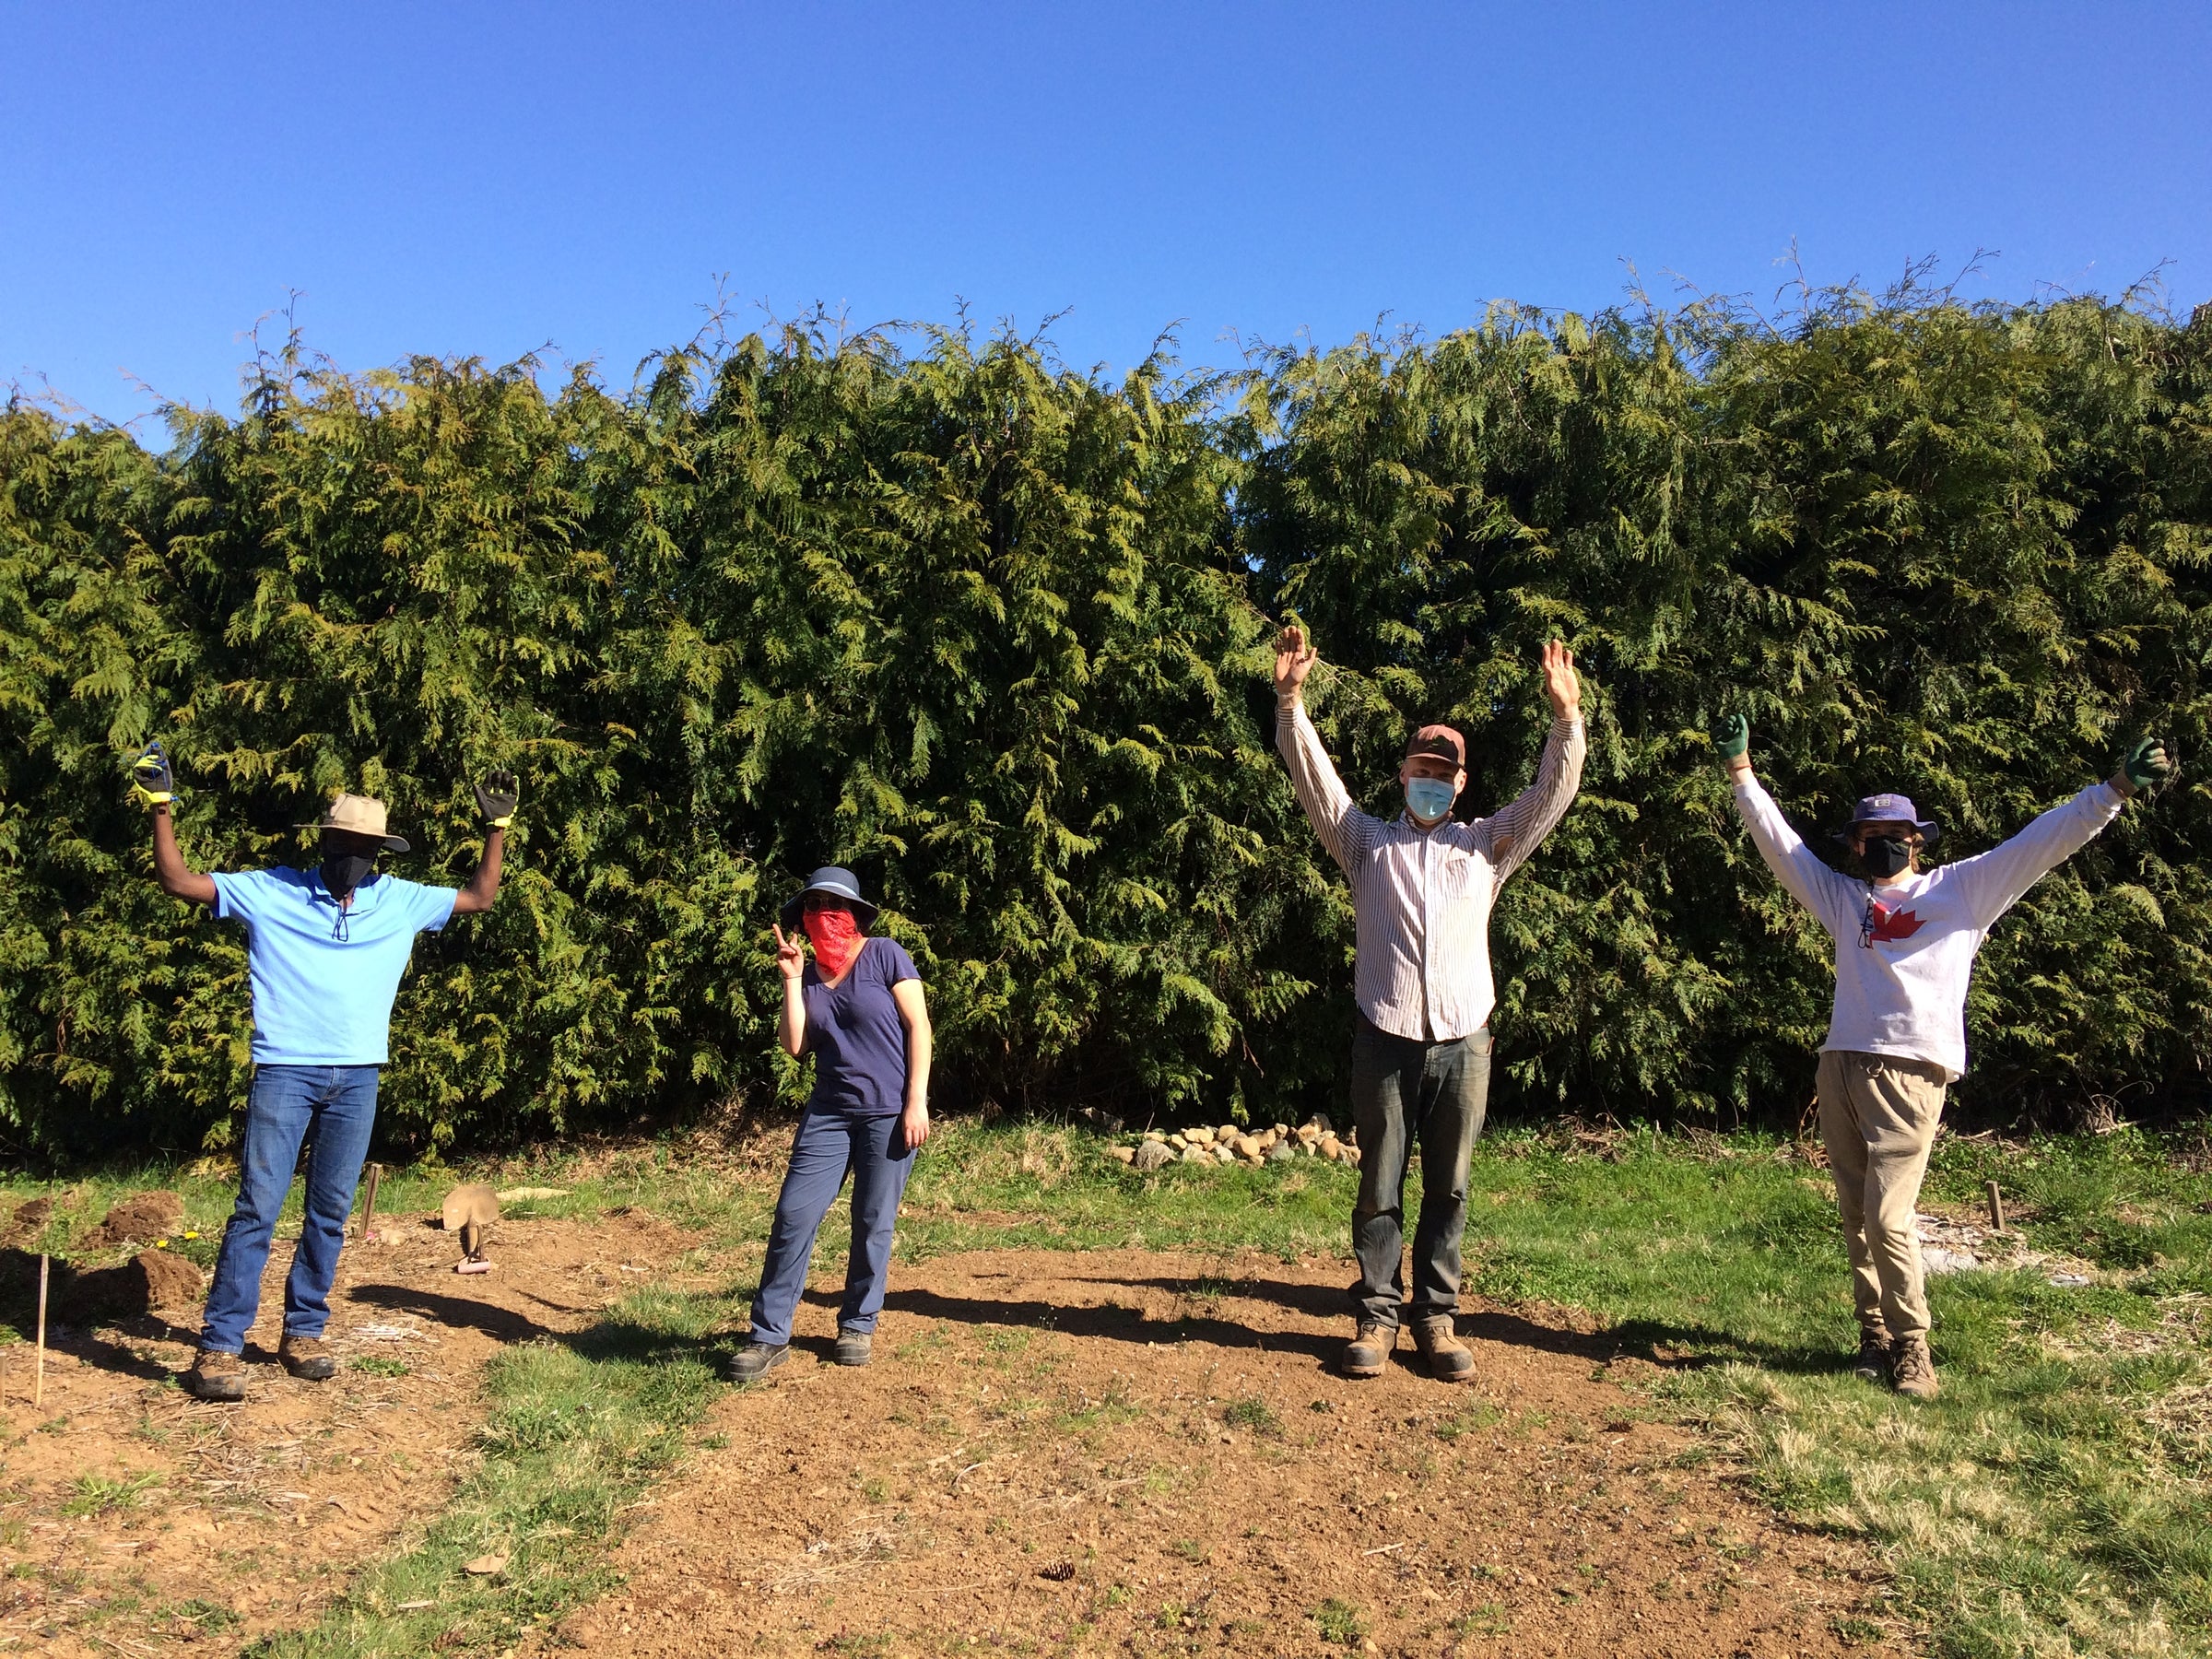 We love what we do - four gardeners waving arms in the air, having fun.